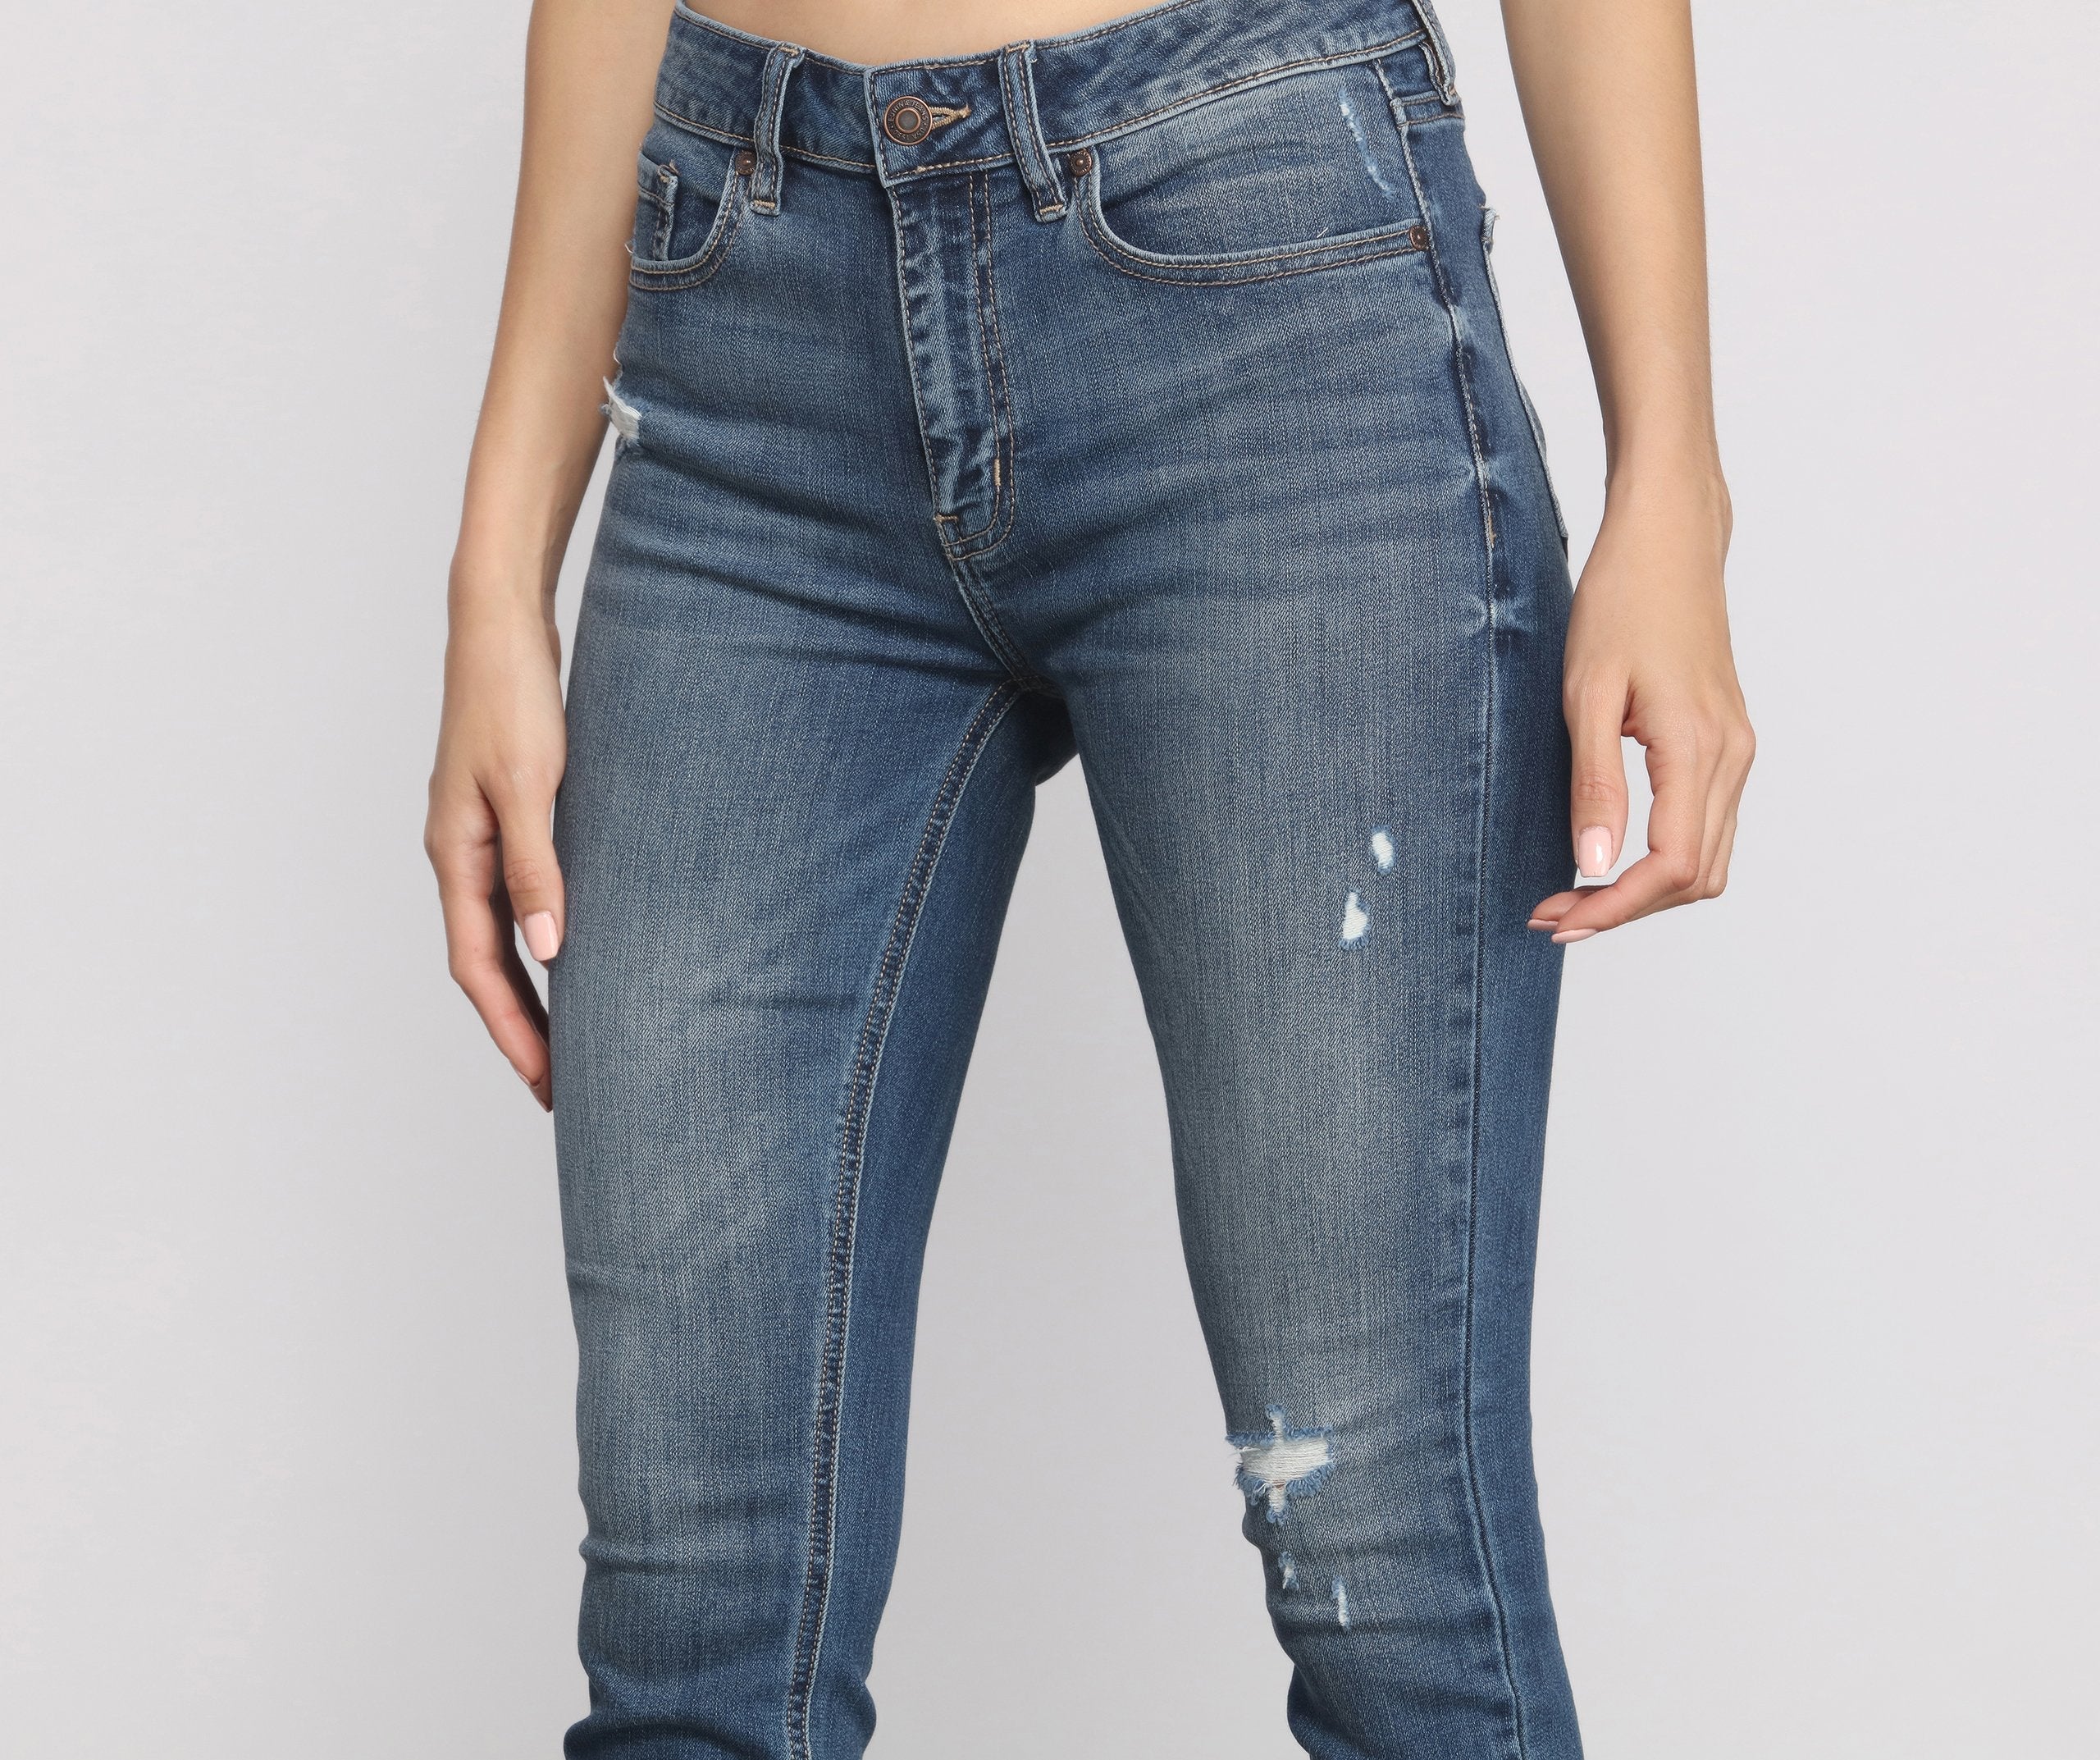 Clara High Rise Destructed Skinny Jeans - Lady Occasions